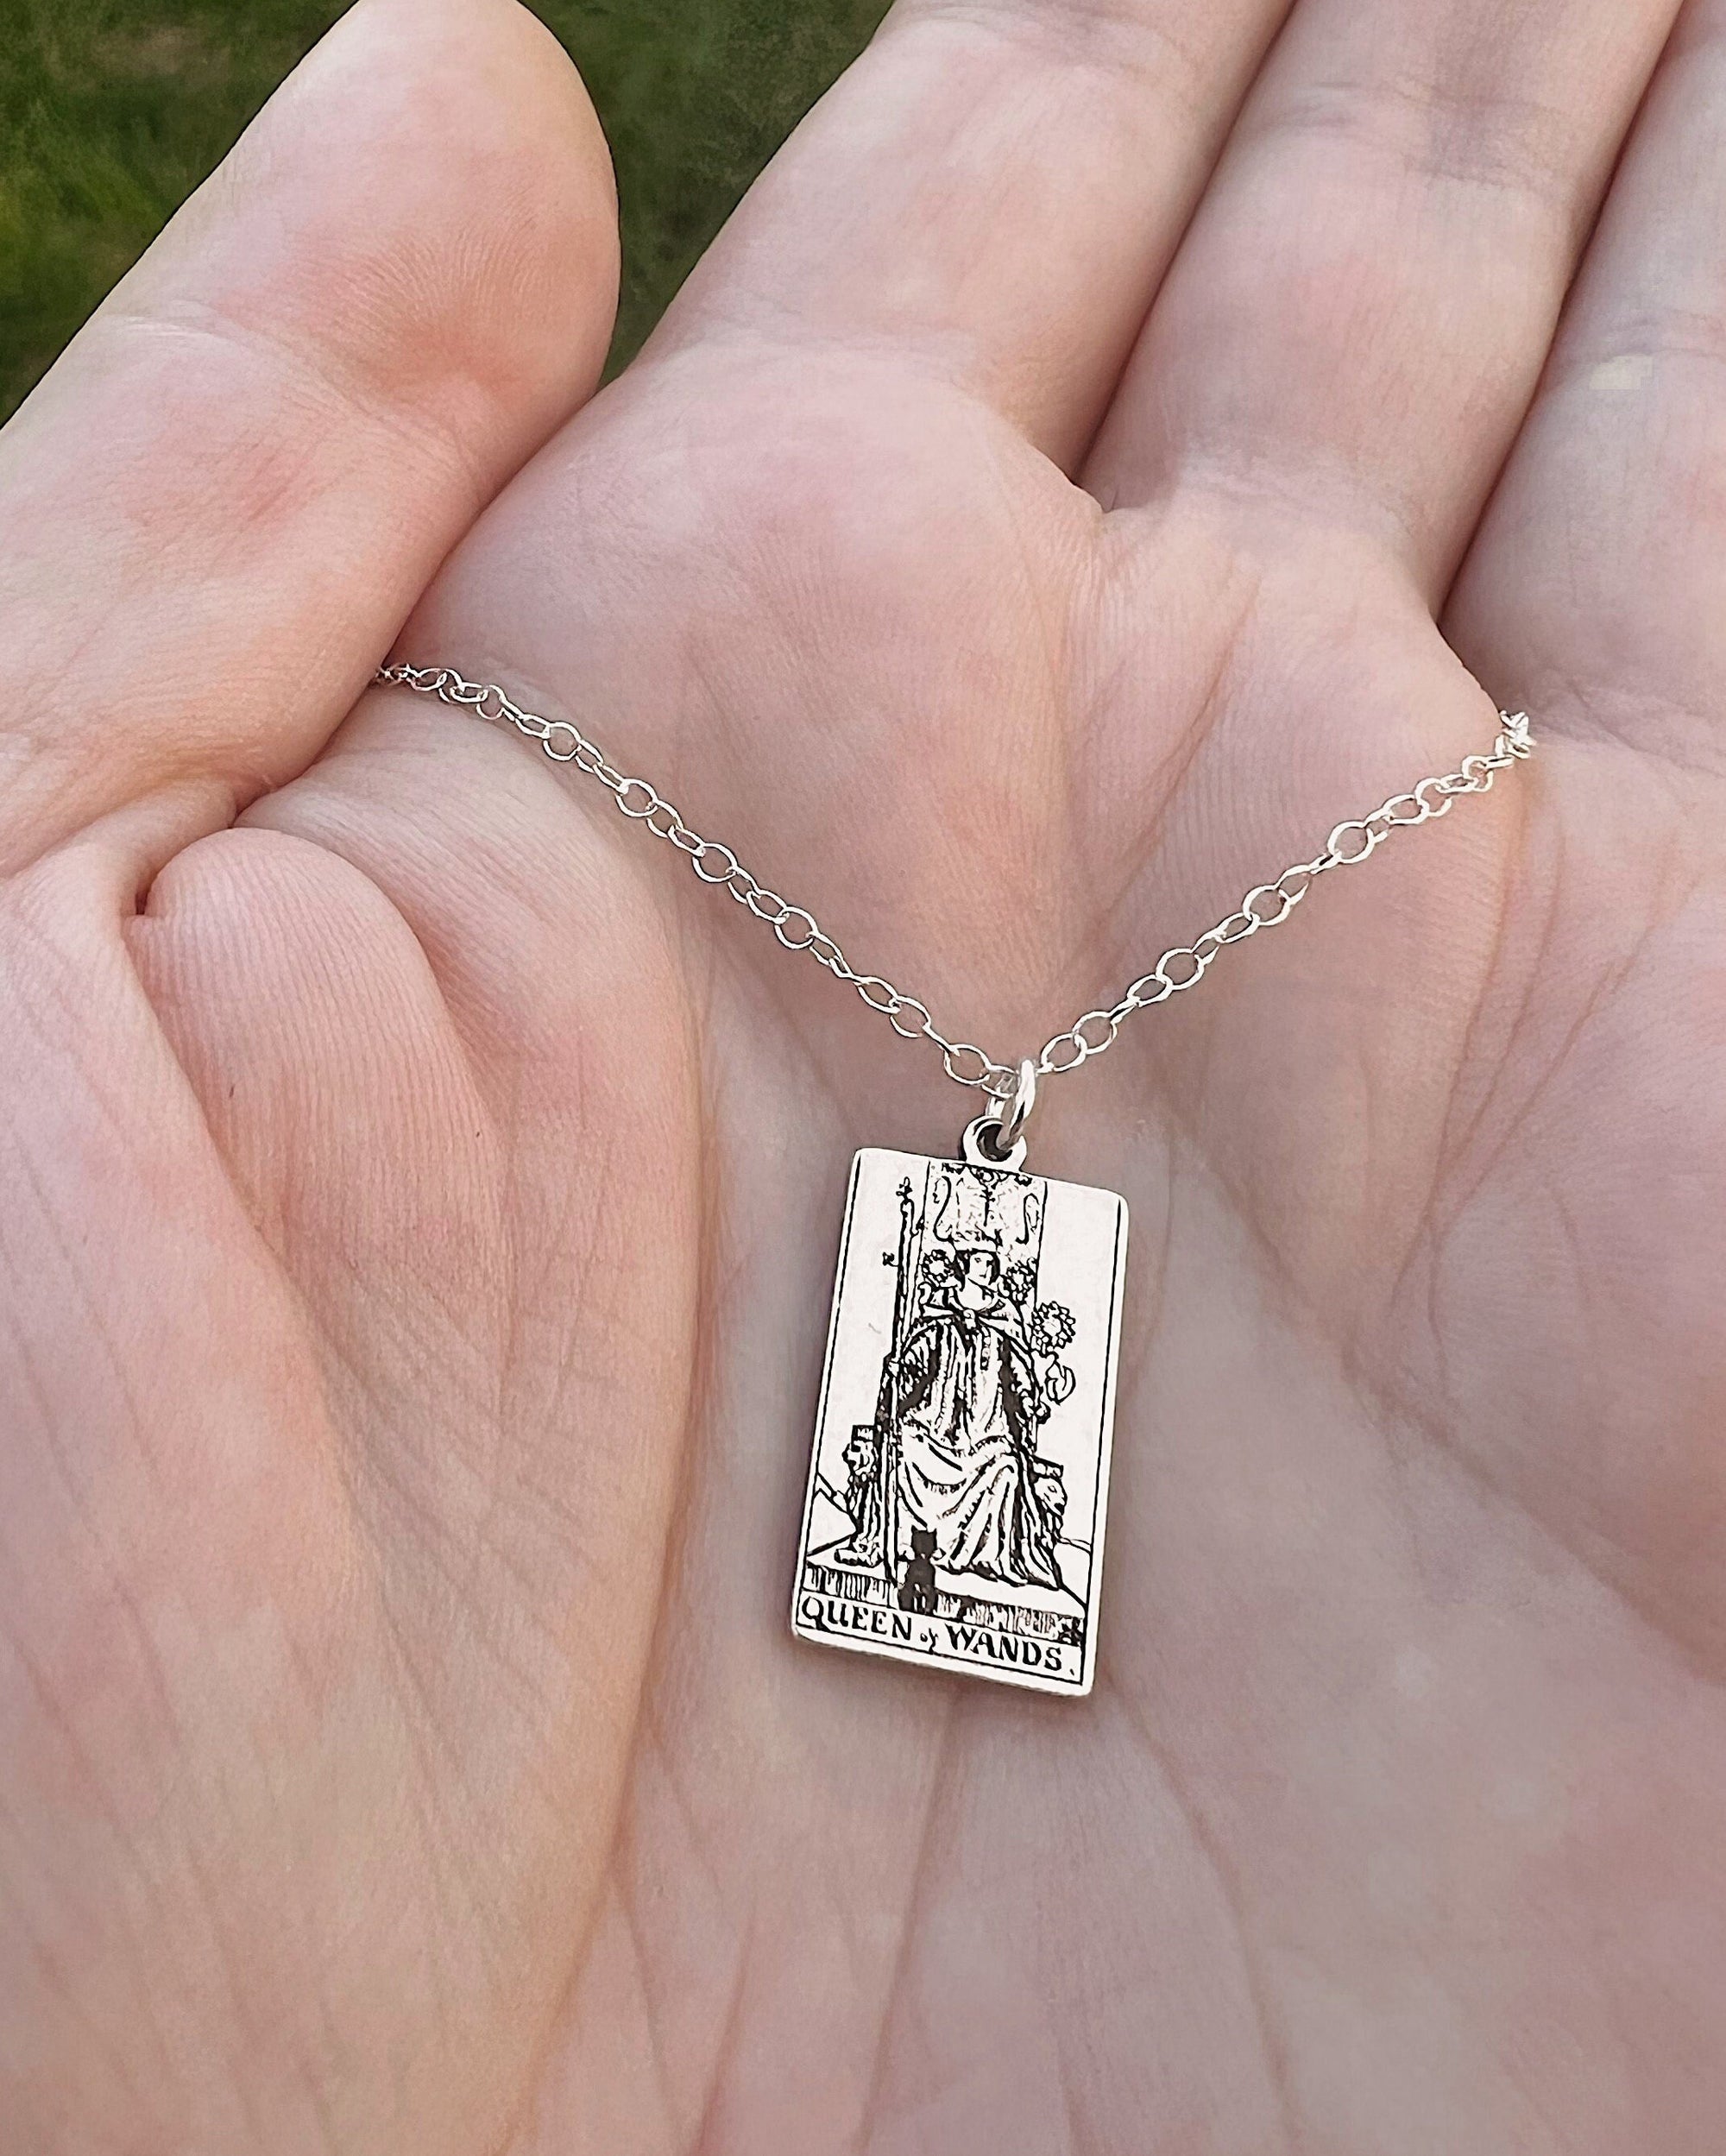 Queen of Wands Tarot Card Necklace - Sterling Silver